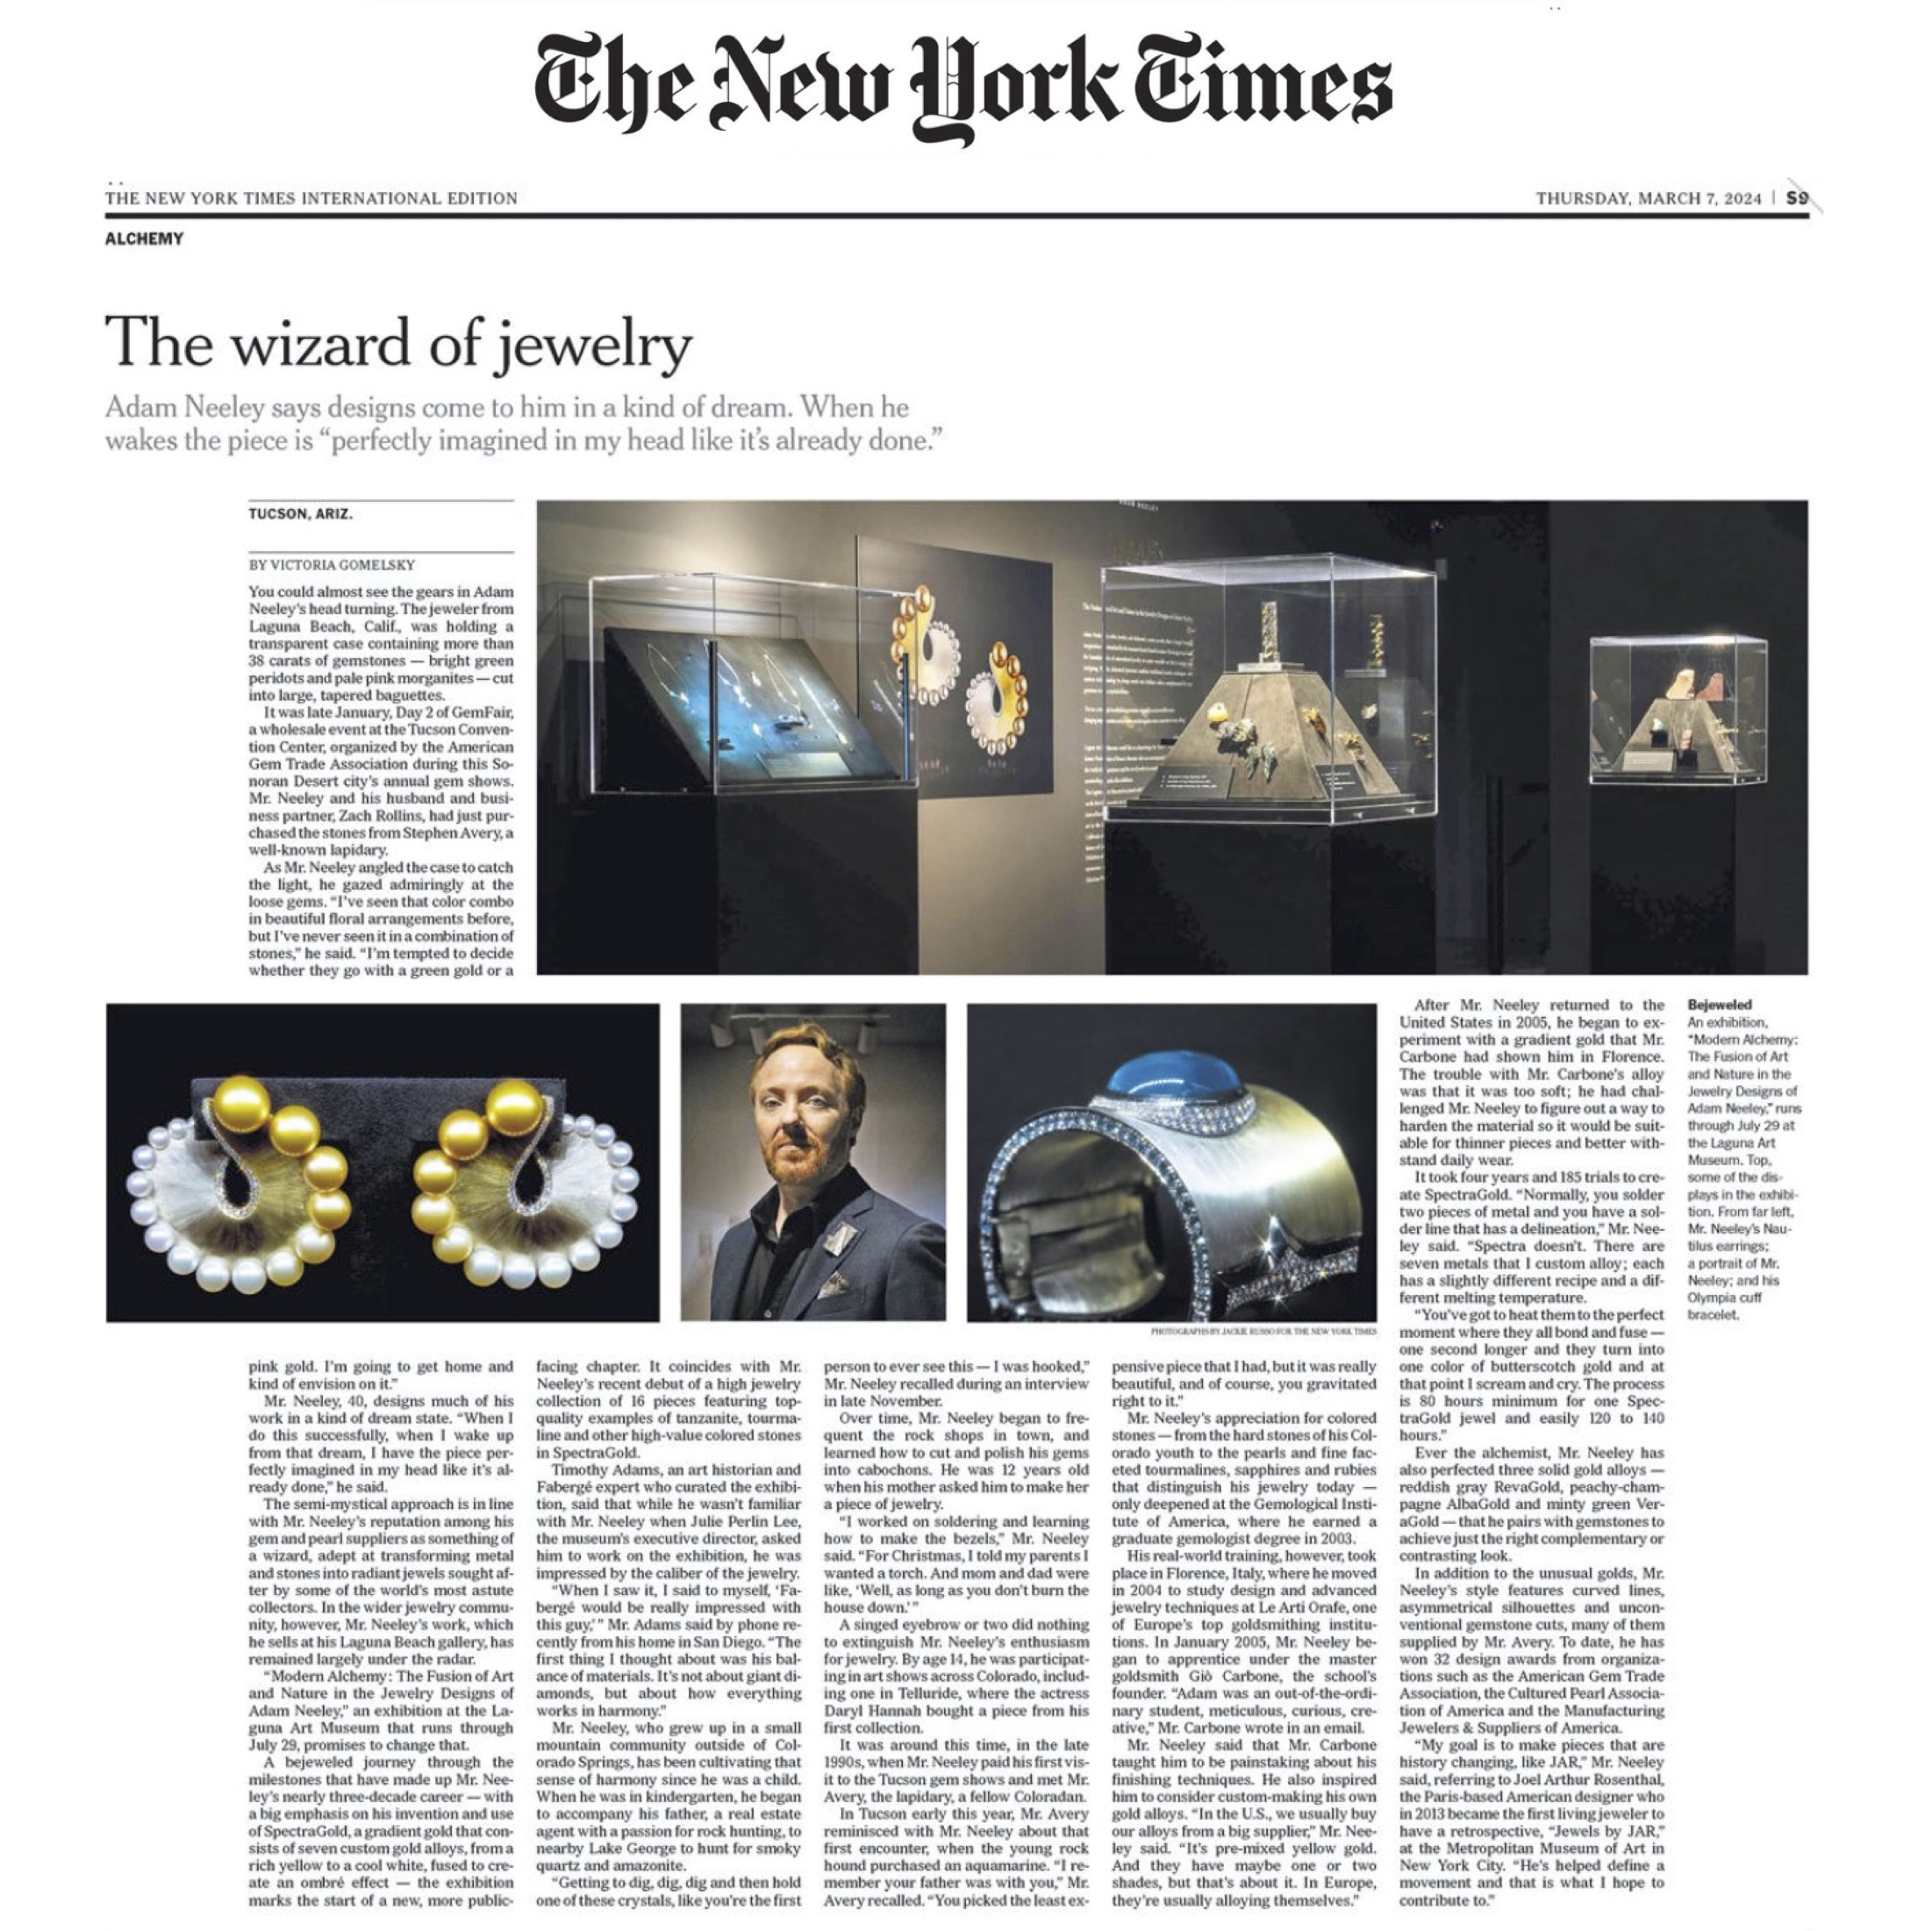 New York Times - The Wizard of Jewelry